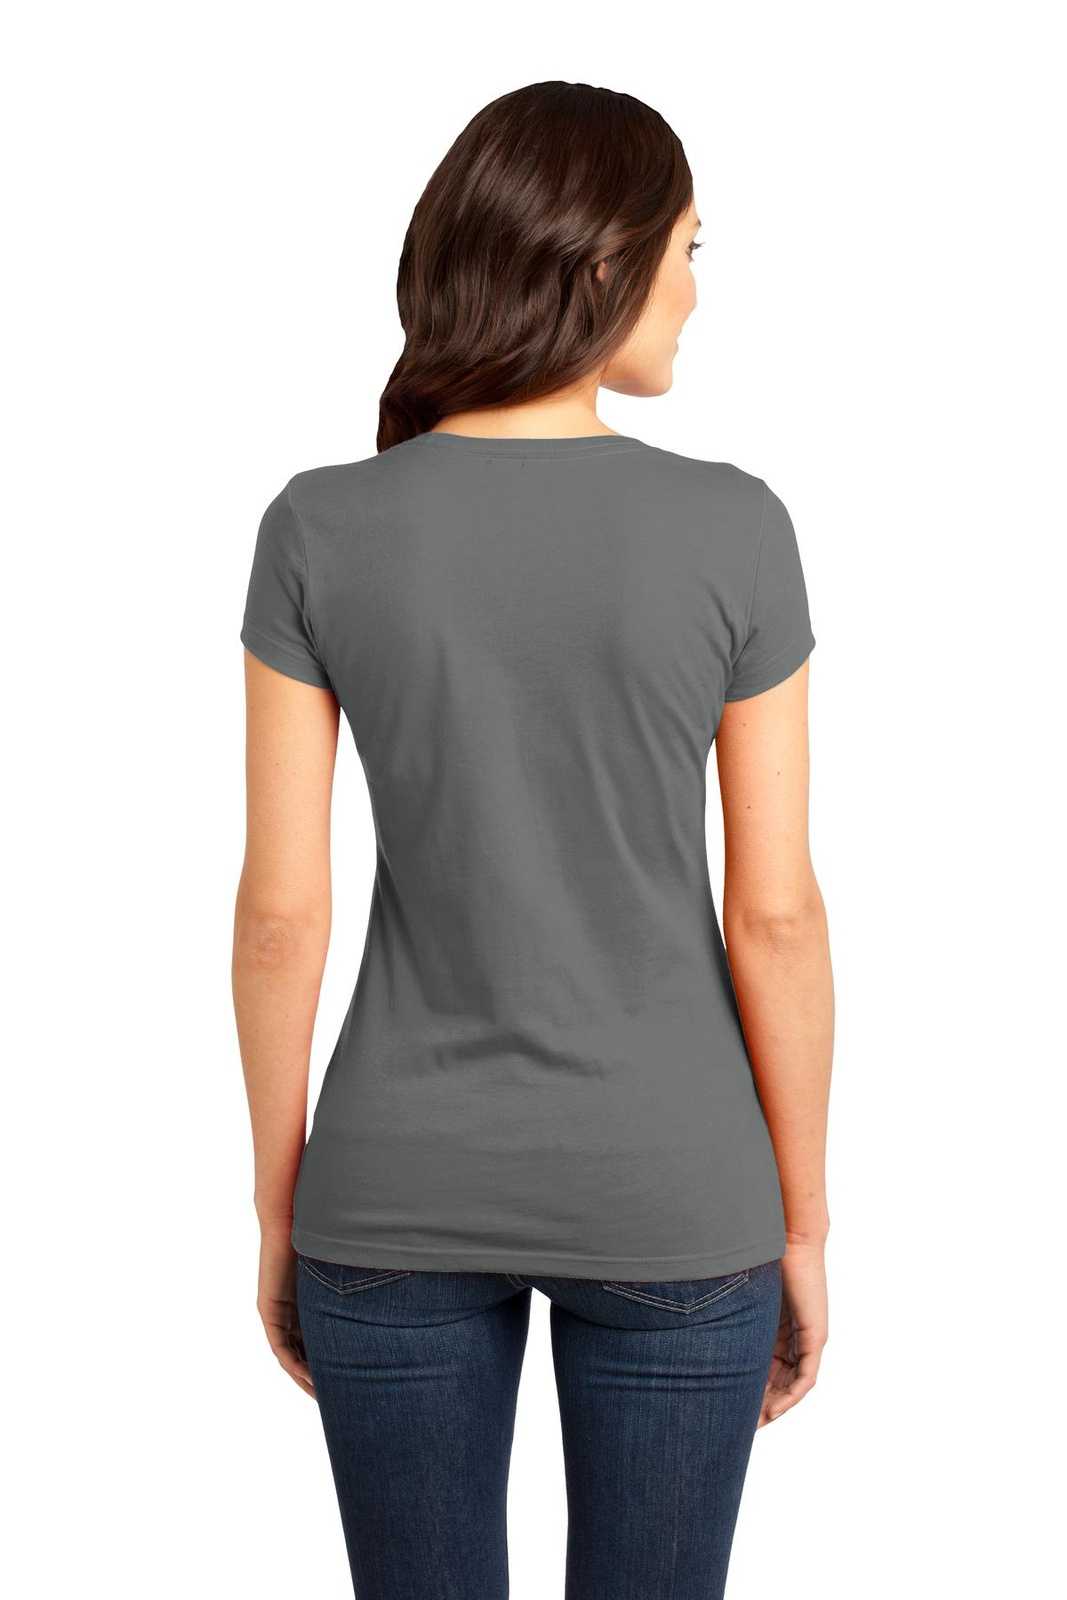 District DT6001 Women's Fitted Very Important Tee - Gray - HIT a Double - 1